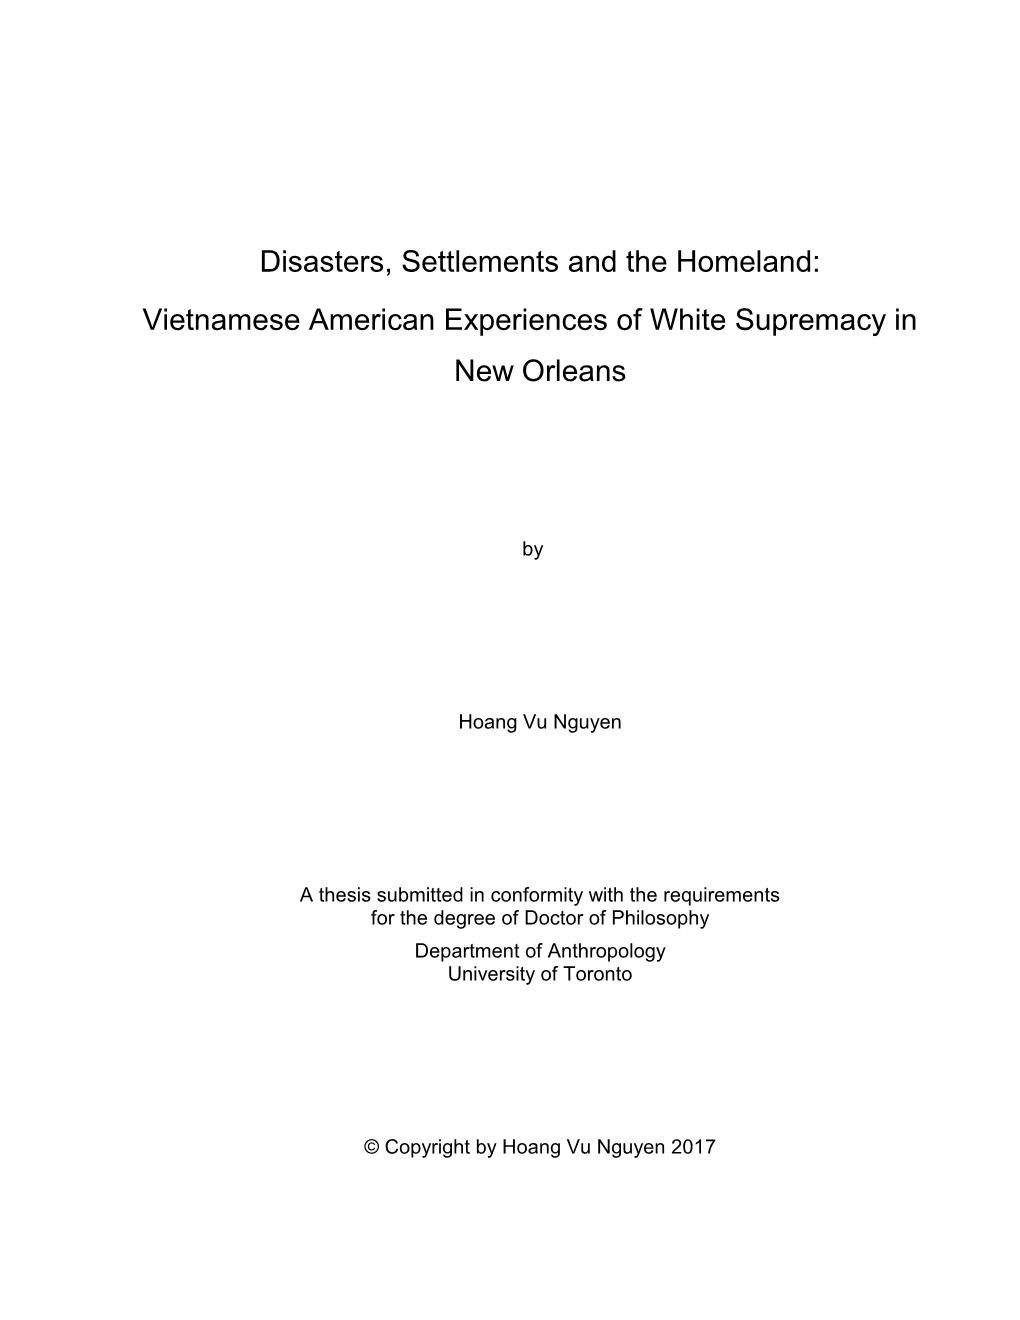 Vietnamese American Experiences of White Supremacy in New Orleans